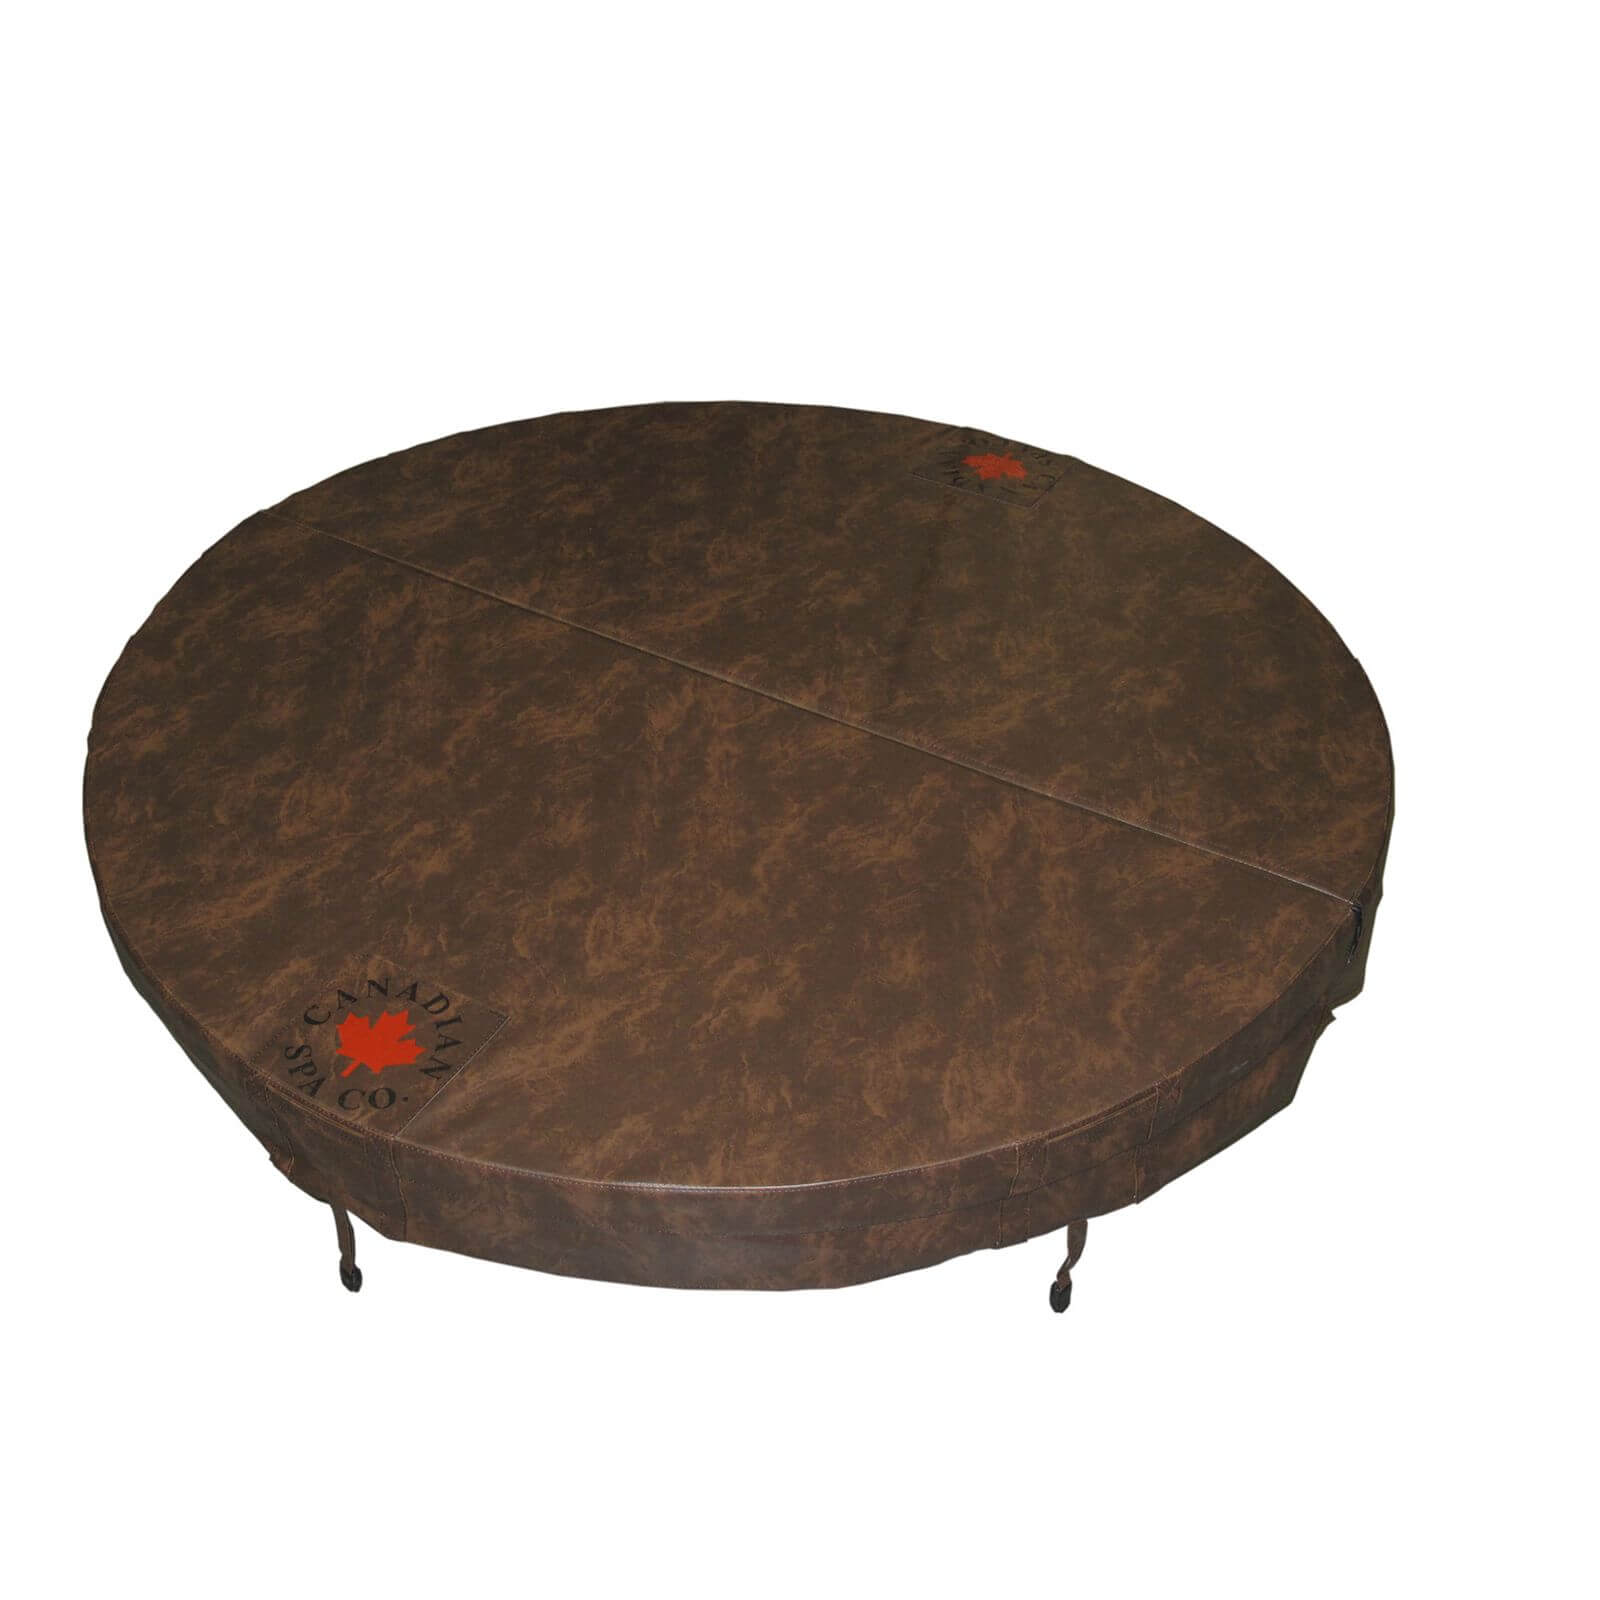 Canadian Spa Round Hot Tub Cover - Brown / 198cm Diameter